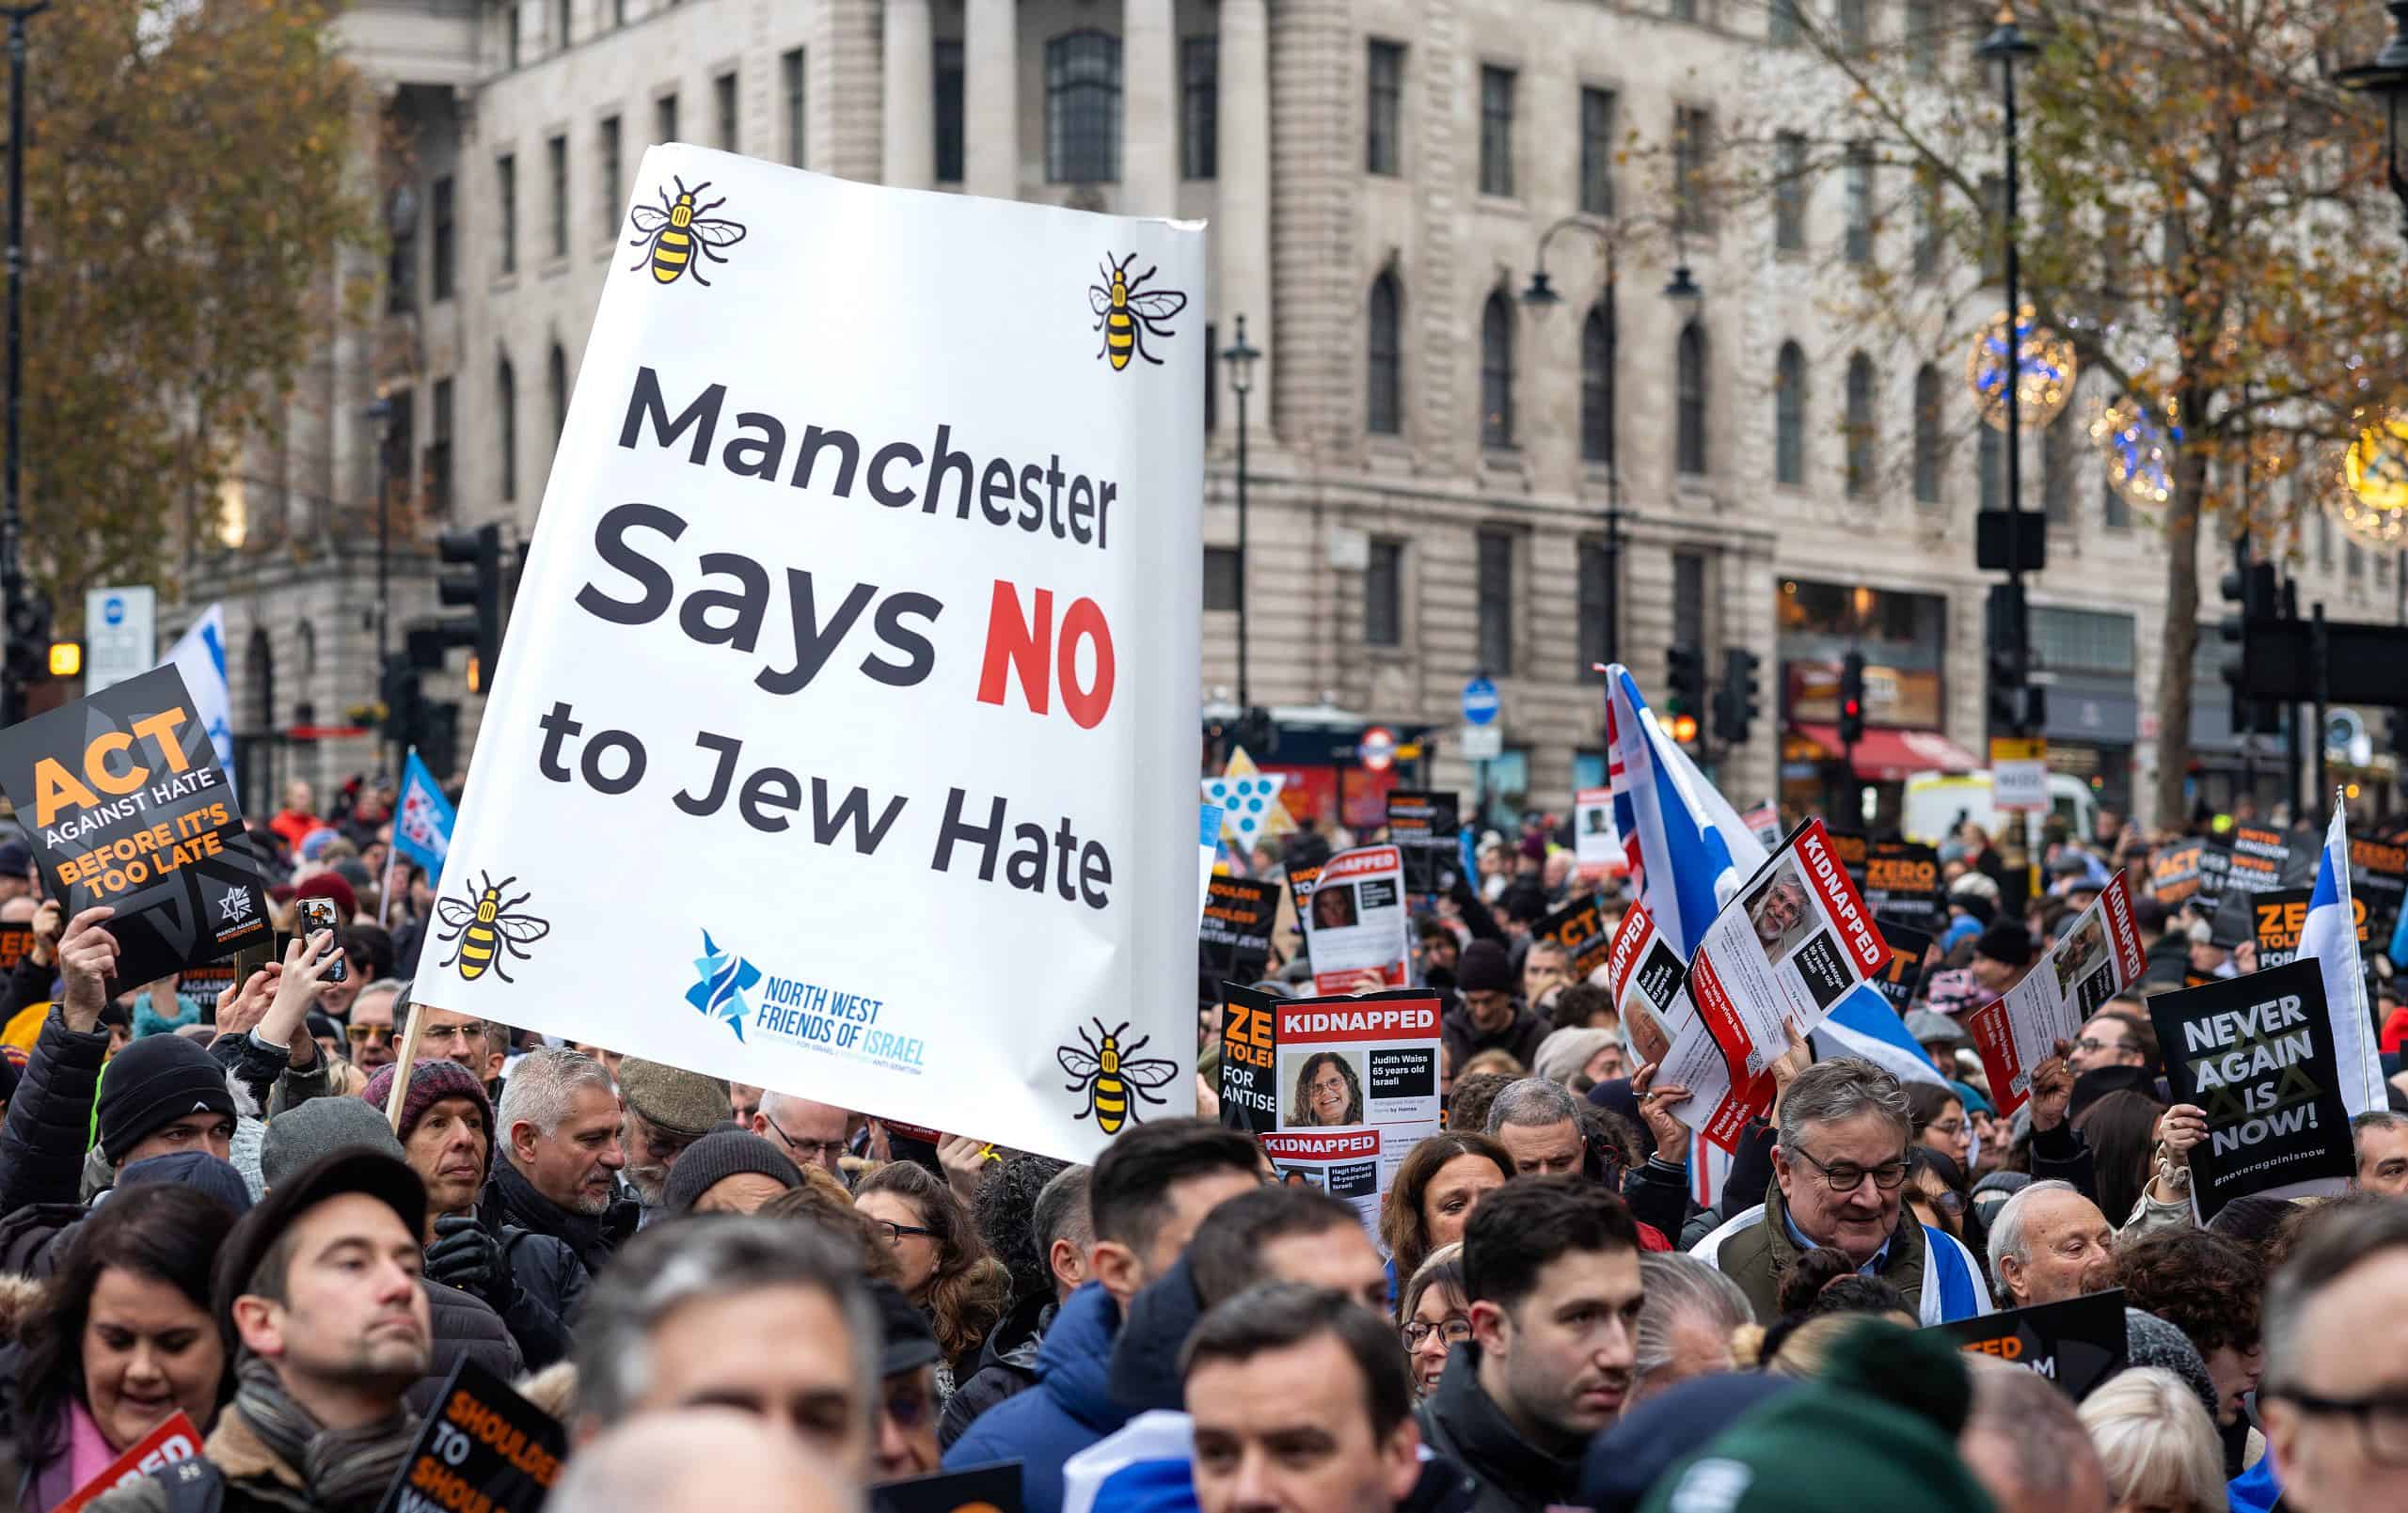 “March Against Antisemitism” in London